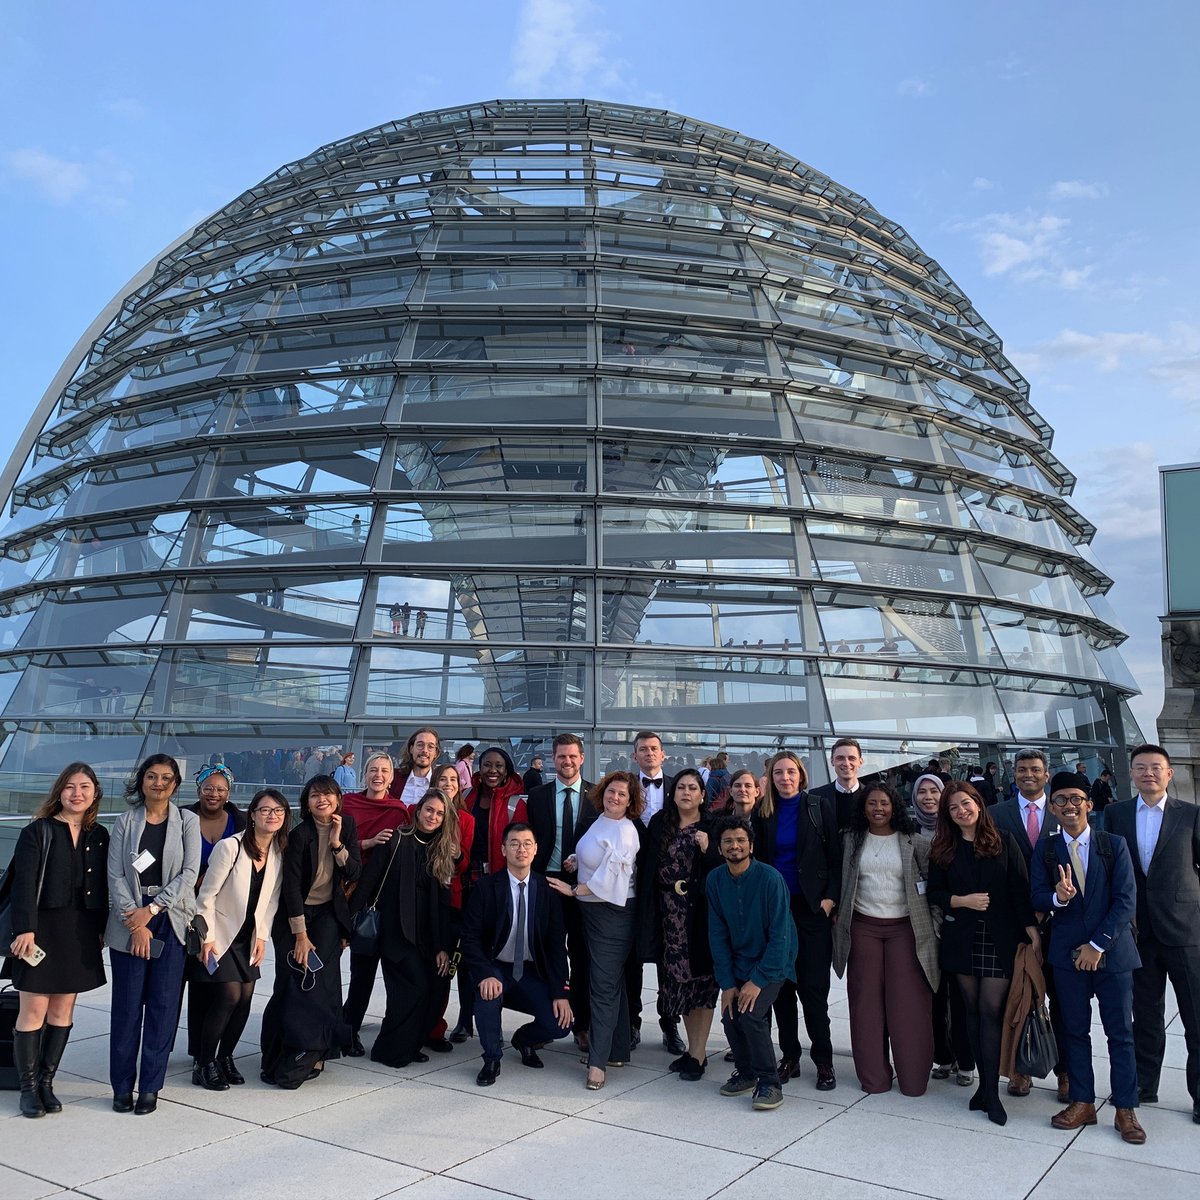 After ten days of discussions on the global agenda for digital governance towards #SustainableDevelopment, #IF20 has come to an end. Thanks to all participants from #MGGAcademy and the diplomatic services of 🇨🇳, 🇧🇷, 🇮🇩, 🇲🇽 and 🇿🇦 for the enriching exchange. #MGGNetwork